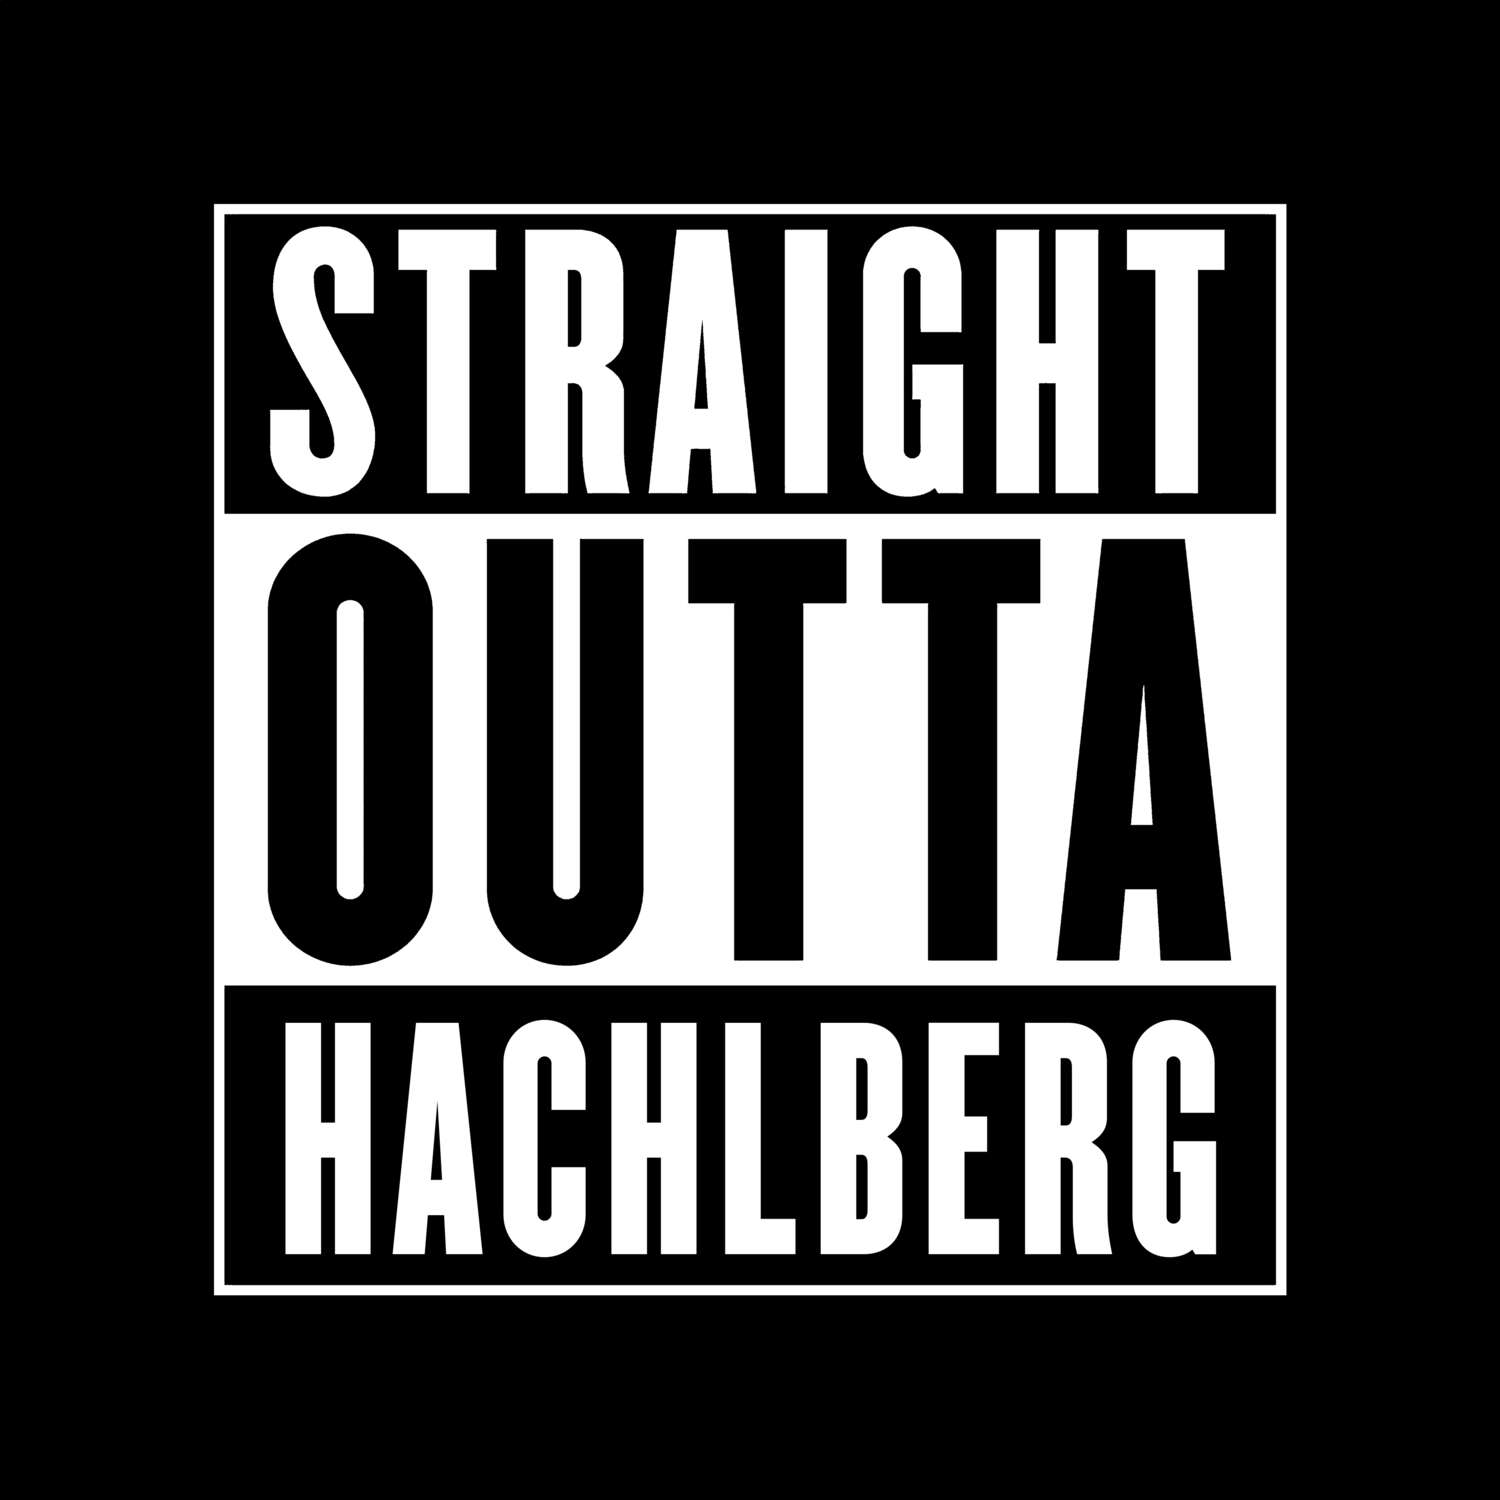 Hachlberg T-Shirt »Straight Outta«